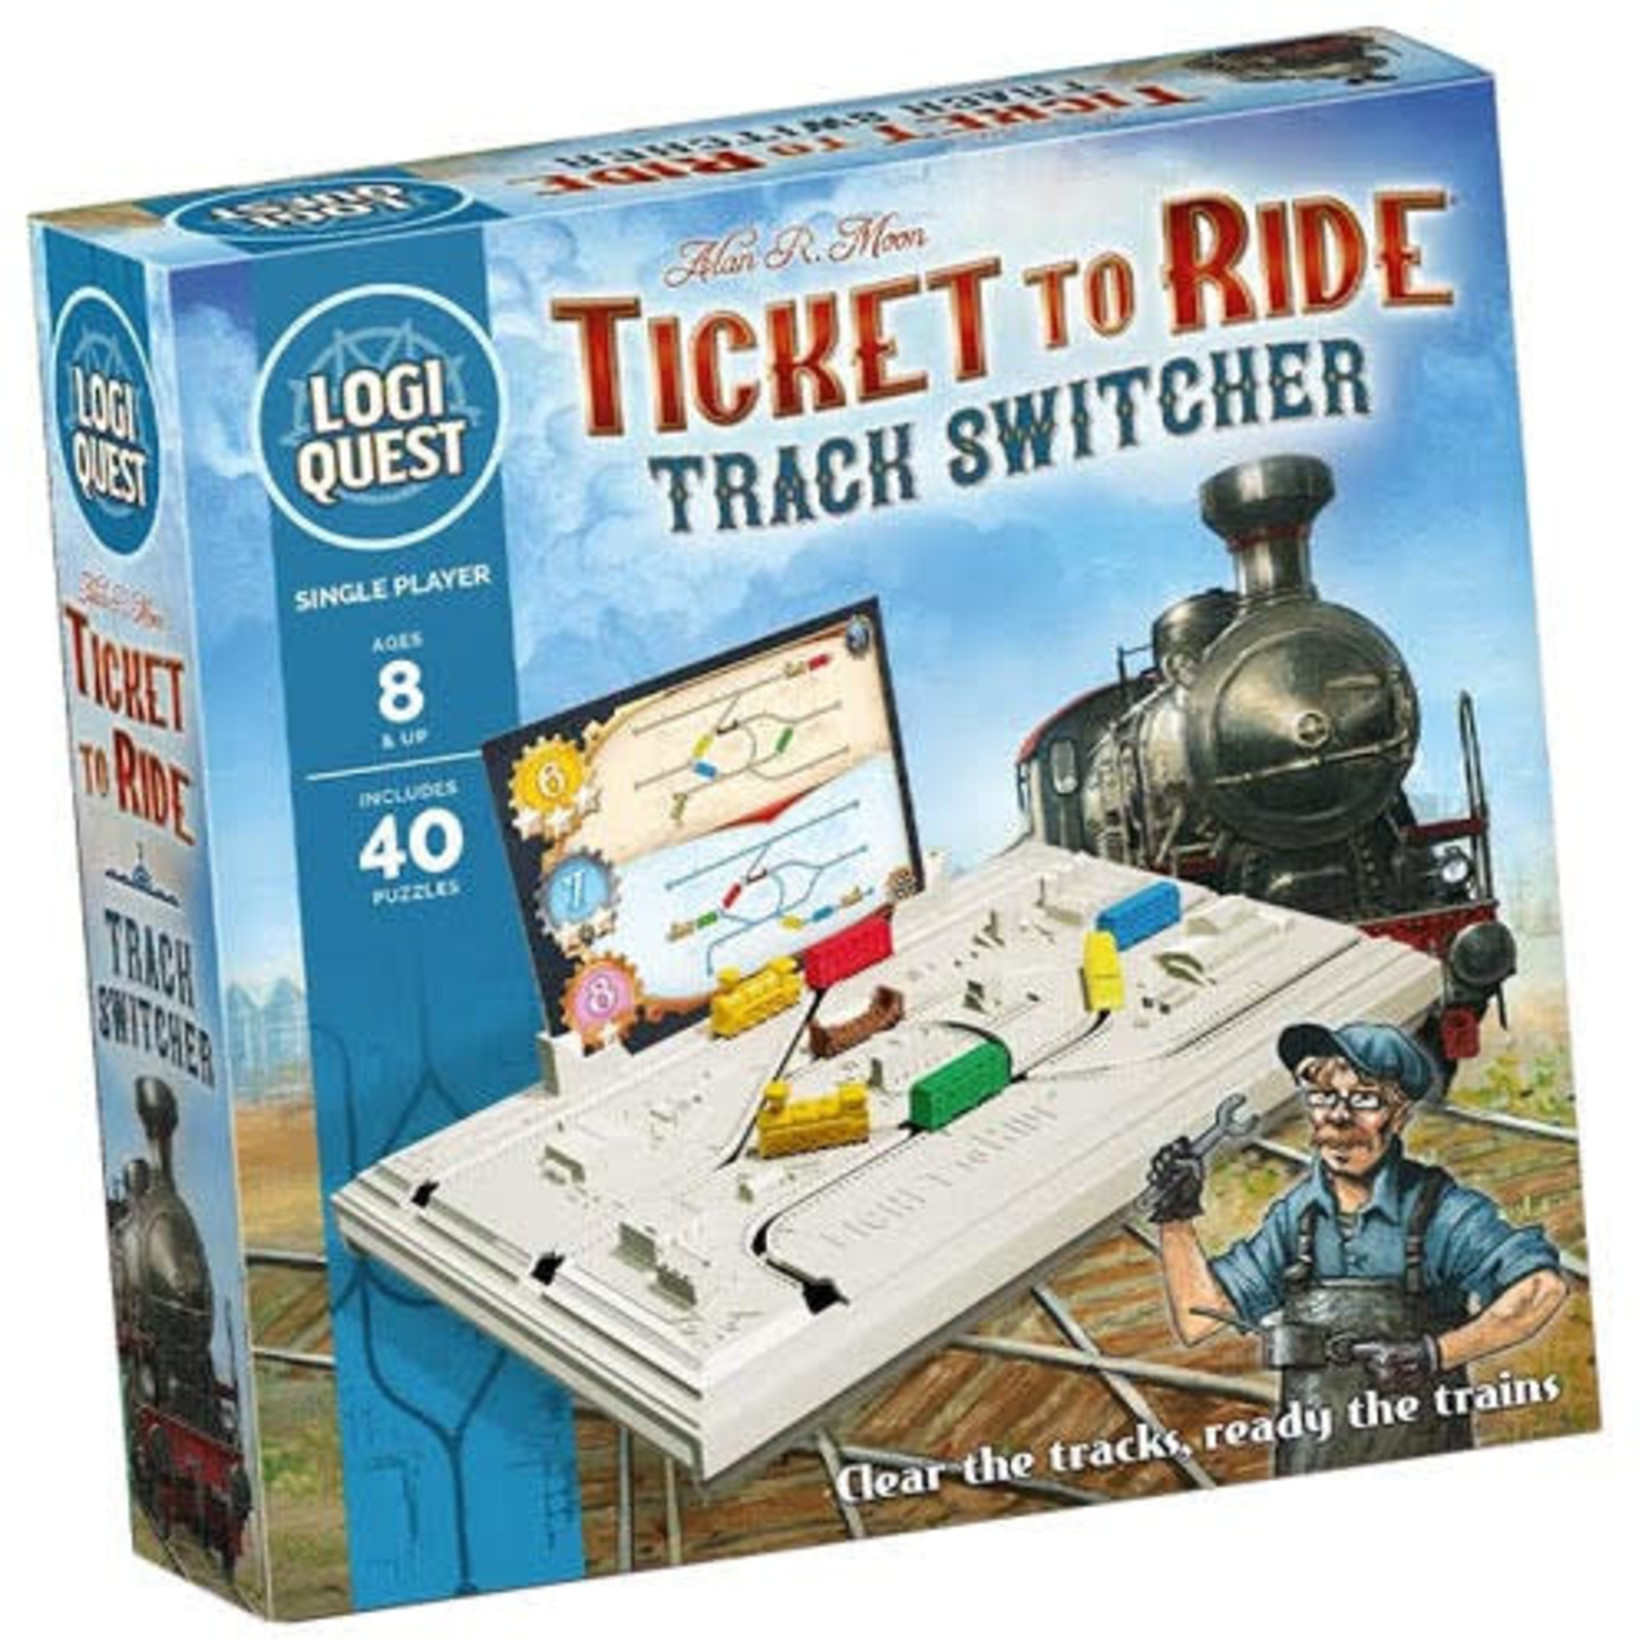 LogiQuest Ticket to Ride: Track Switcher